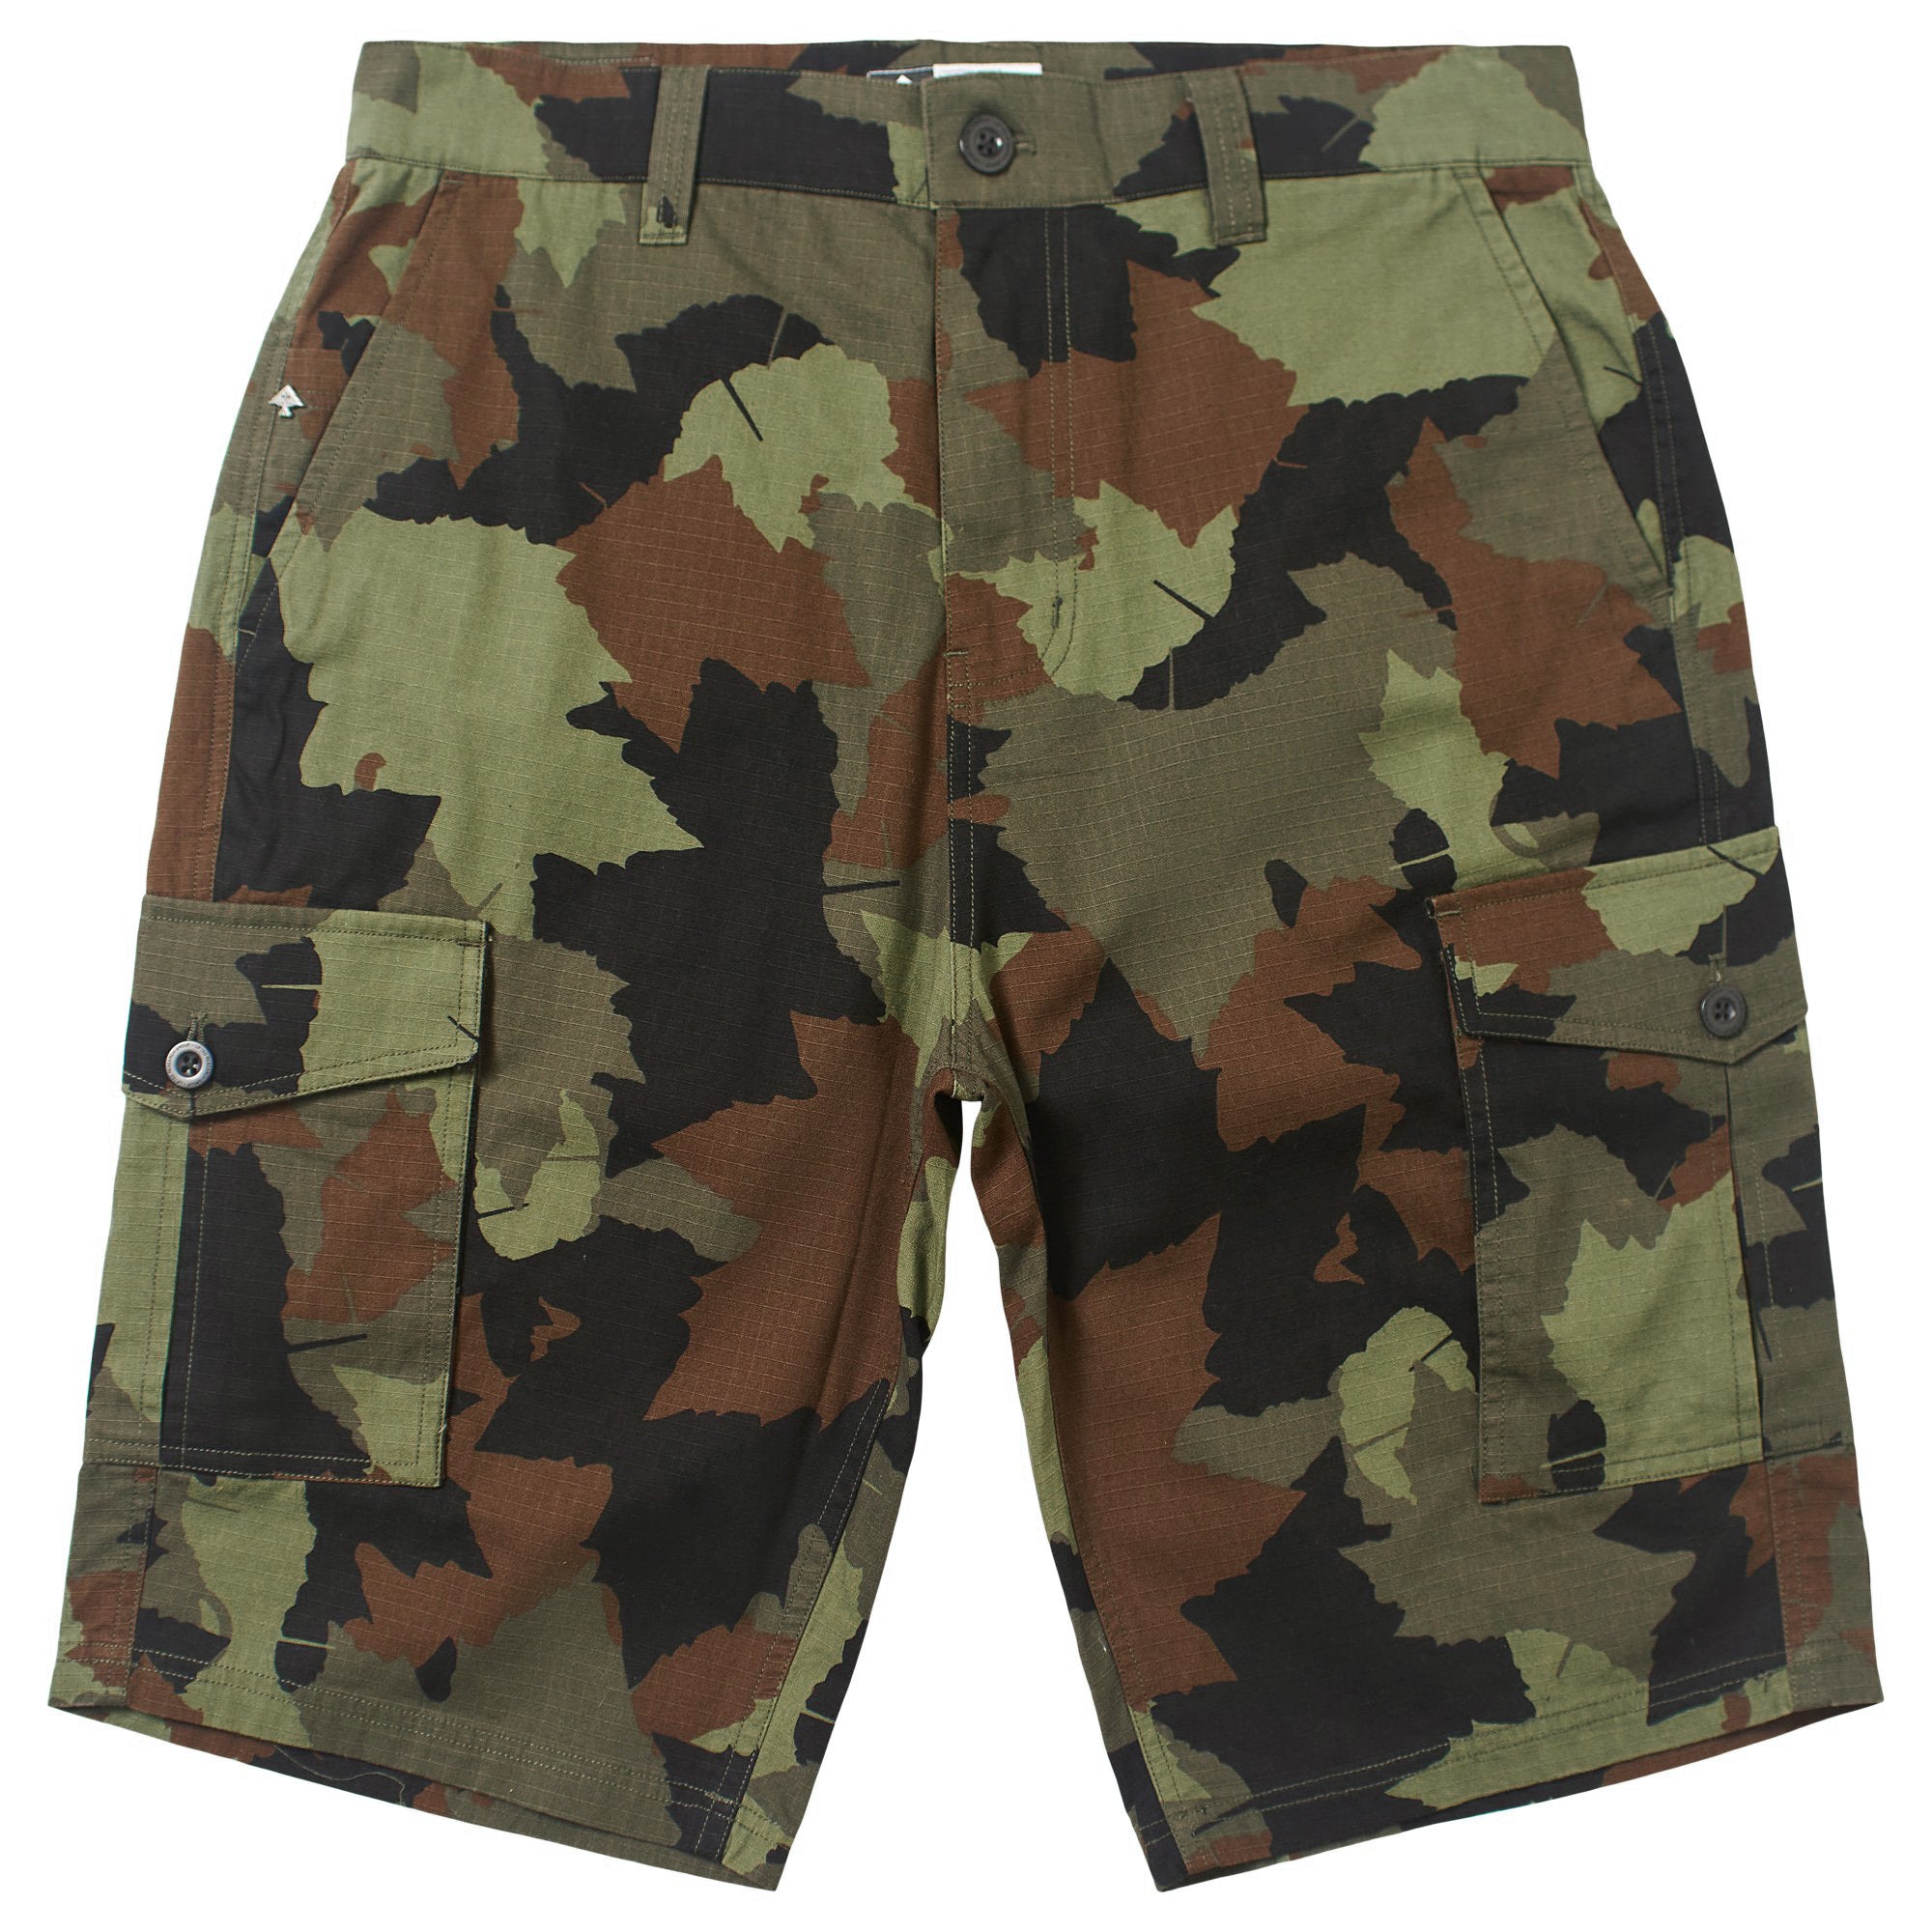 Clearance RYRJJ Men's Tactical Camouflage Cargo Shorts Elastic